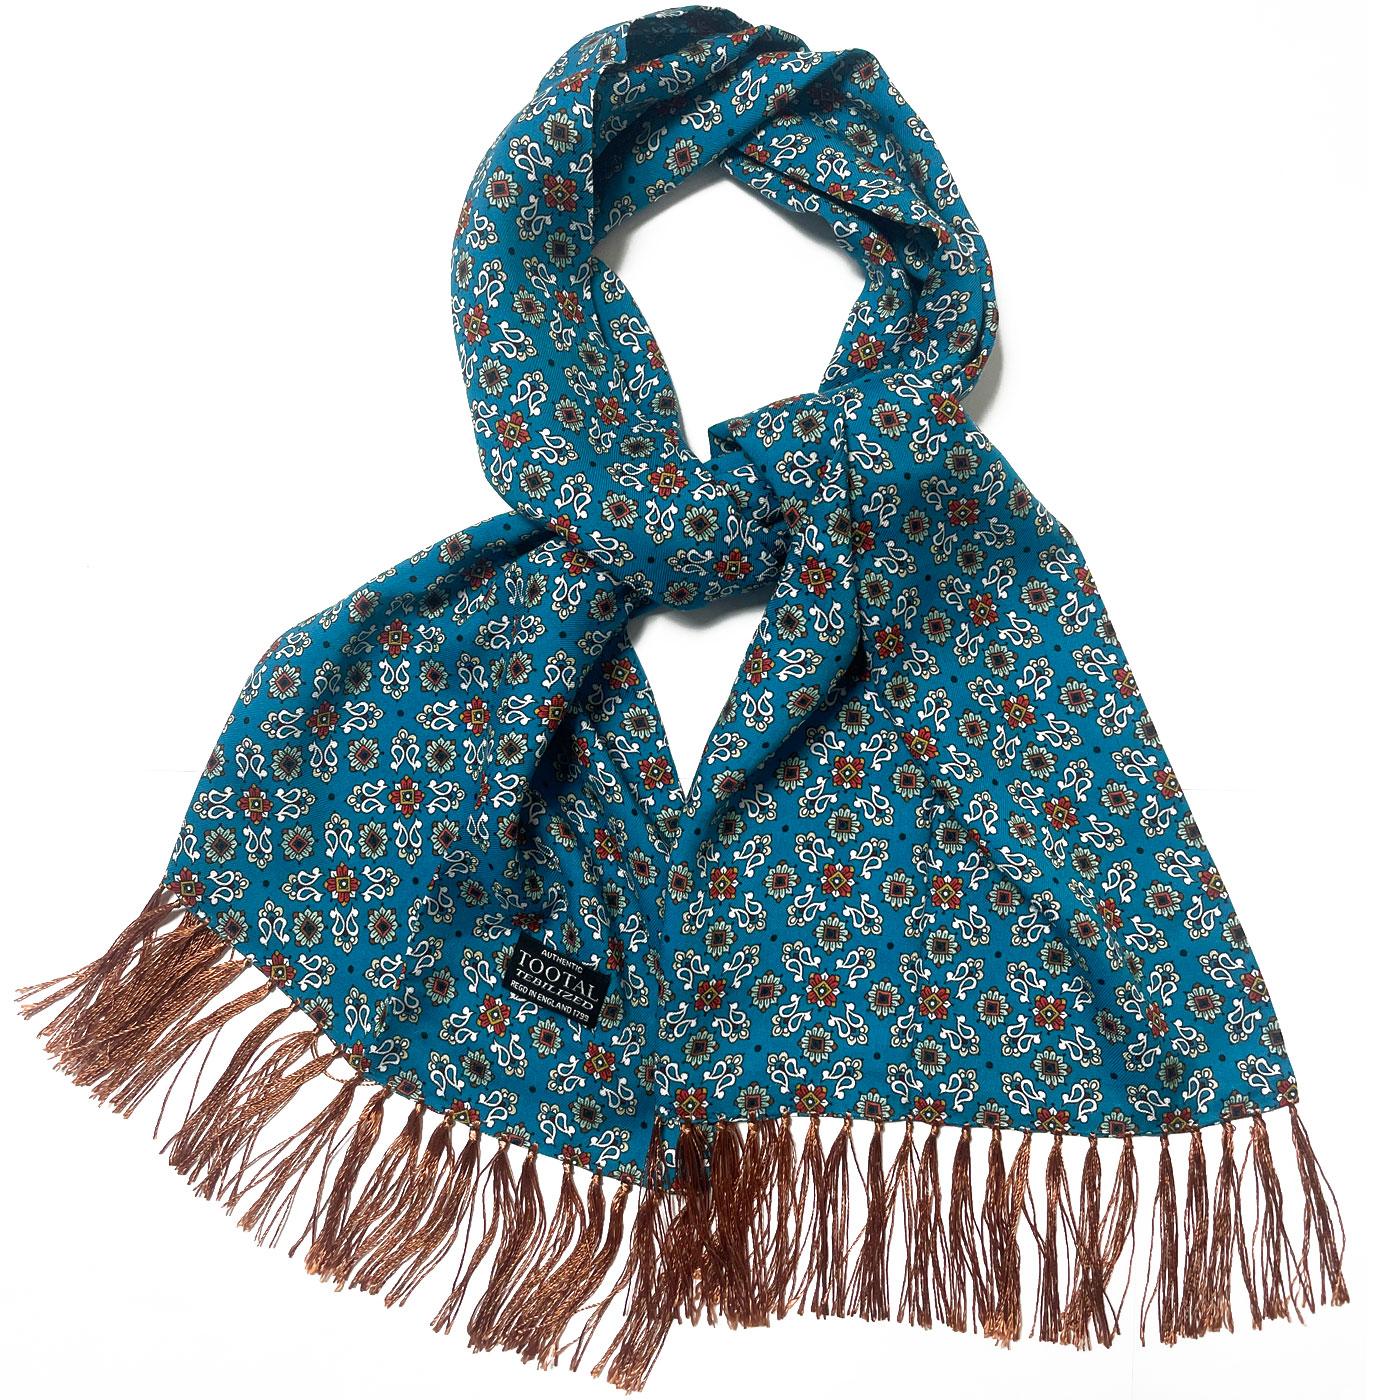 Tootal Retro Ditsy Fringed Rayon Scarf Turquoise